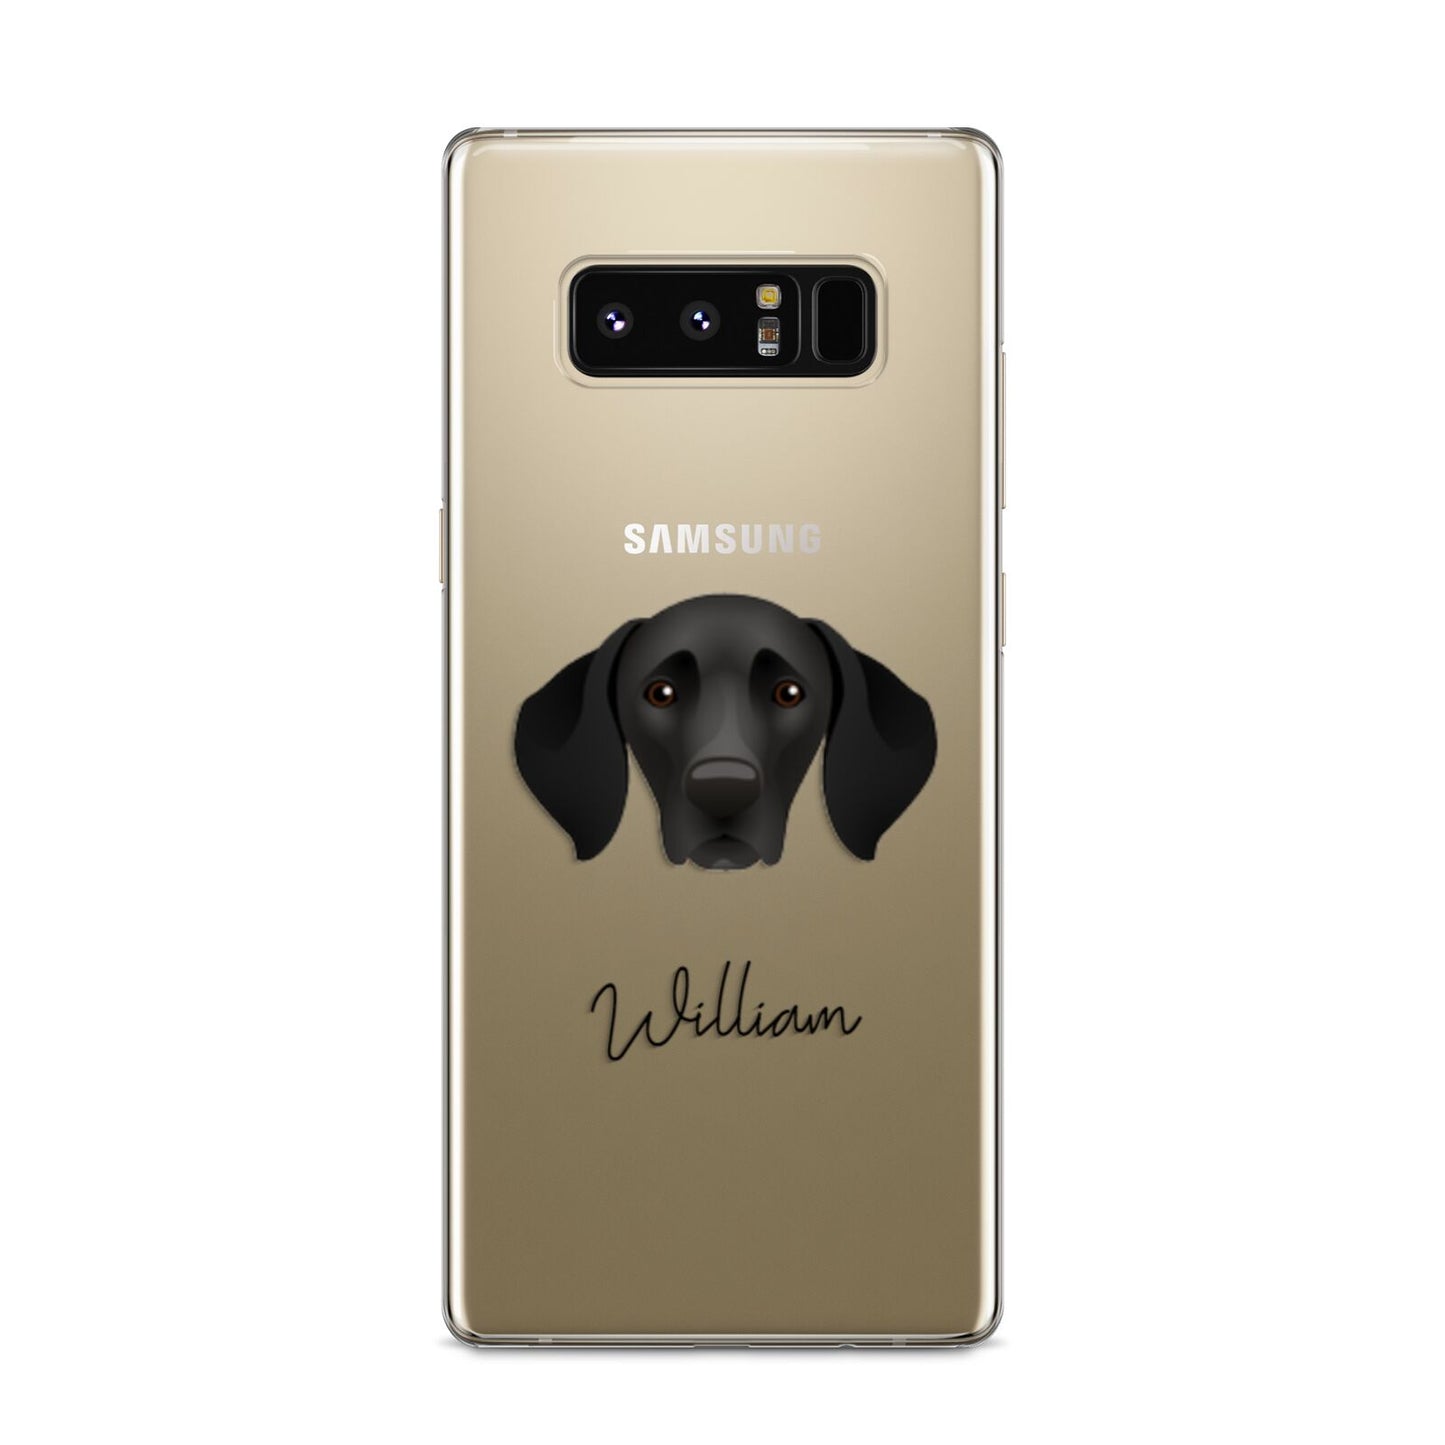 German Shorthaired Pointer Personalised Samsung Galaxy S8 Case